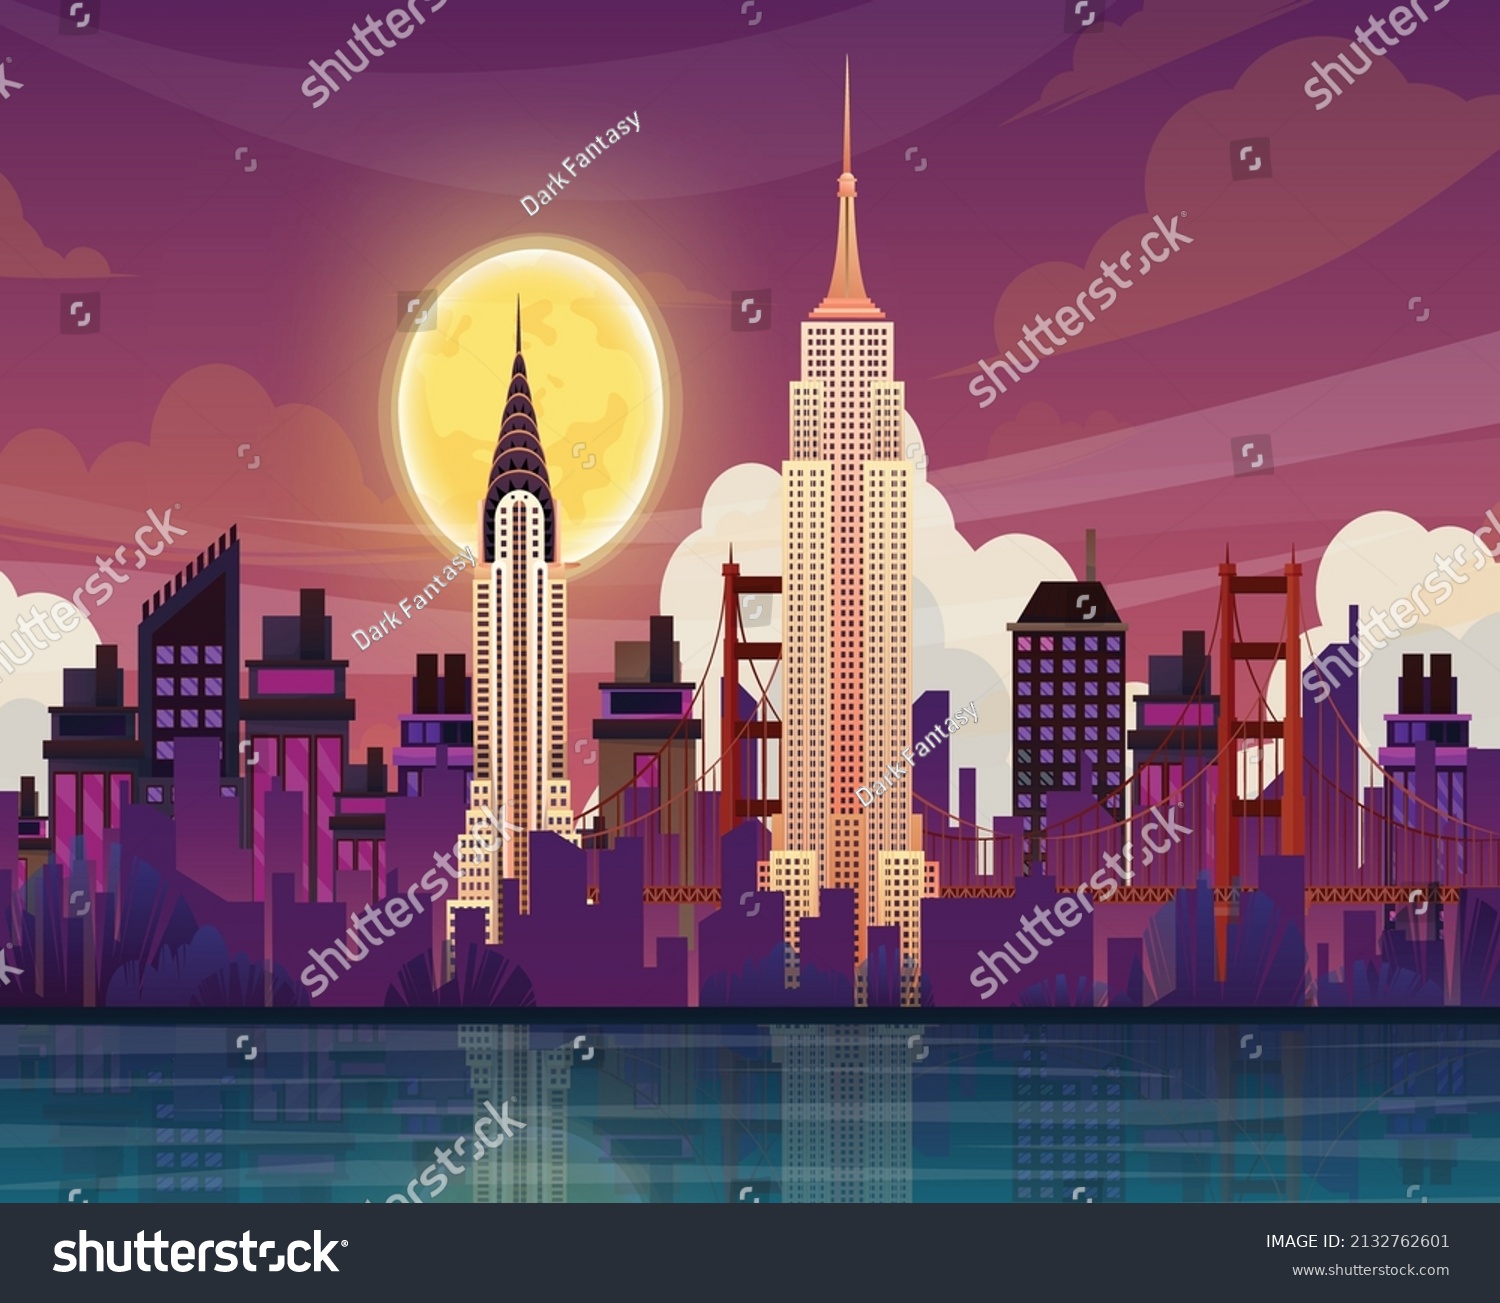 SVG of beautiful scene with Chrysler building empire state building world famous American tourist attraction symbol international architecture landmarks design postcard travel poster illustration.  svg